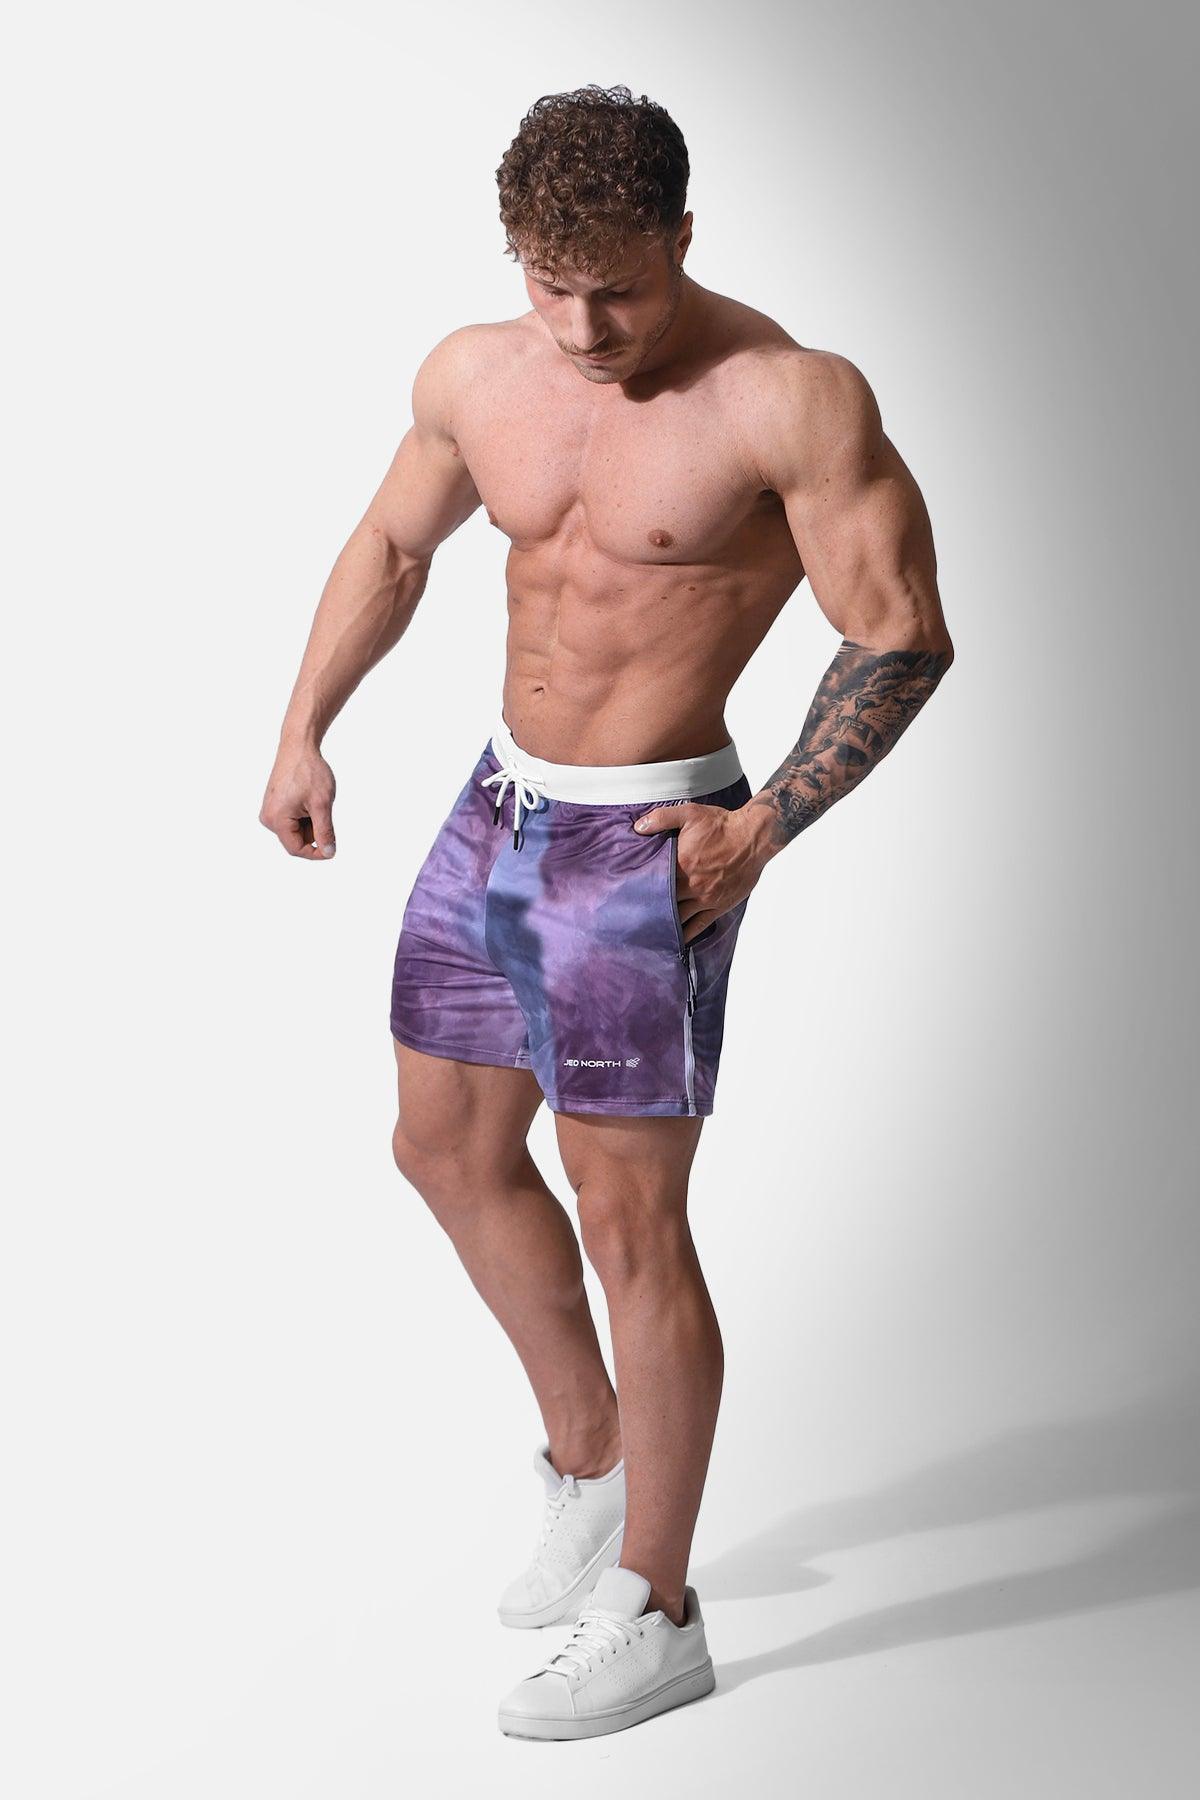 Ace Graphic Casual 5" Shorts 2.0 - Purple Smoke - Jed North